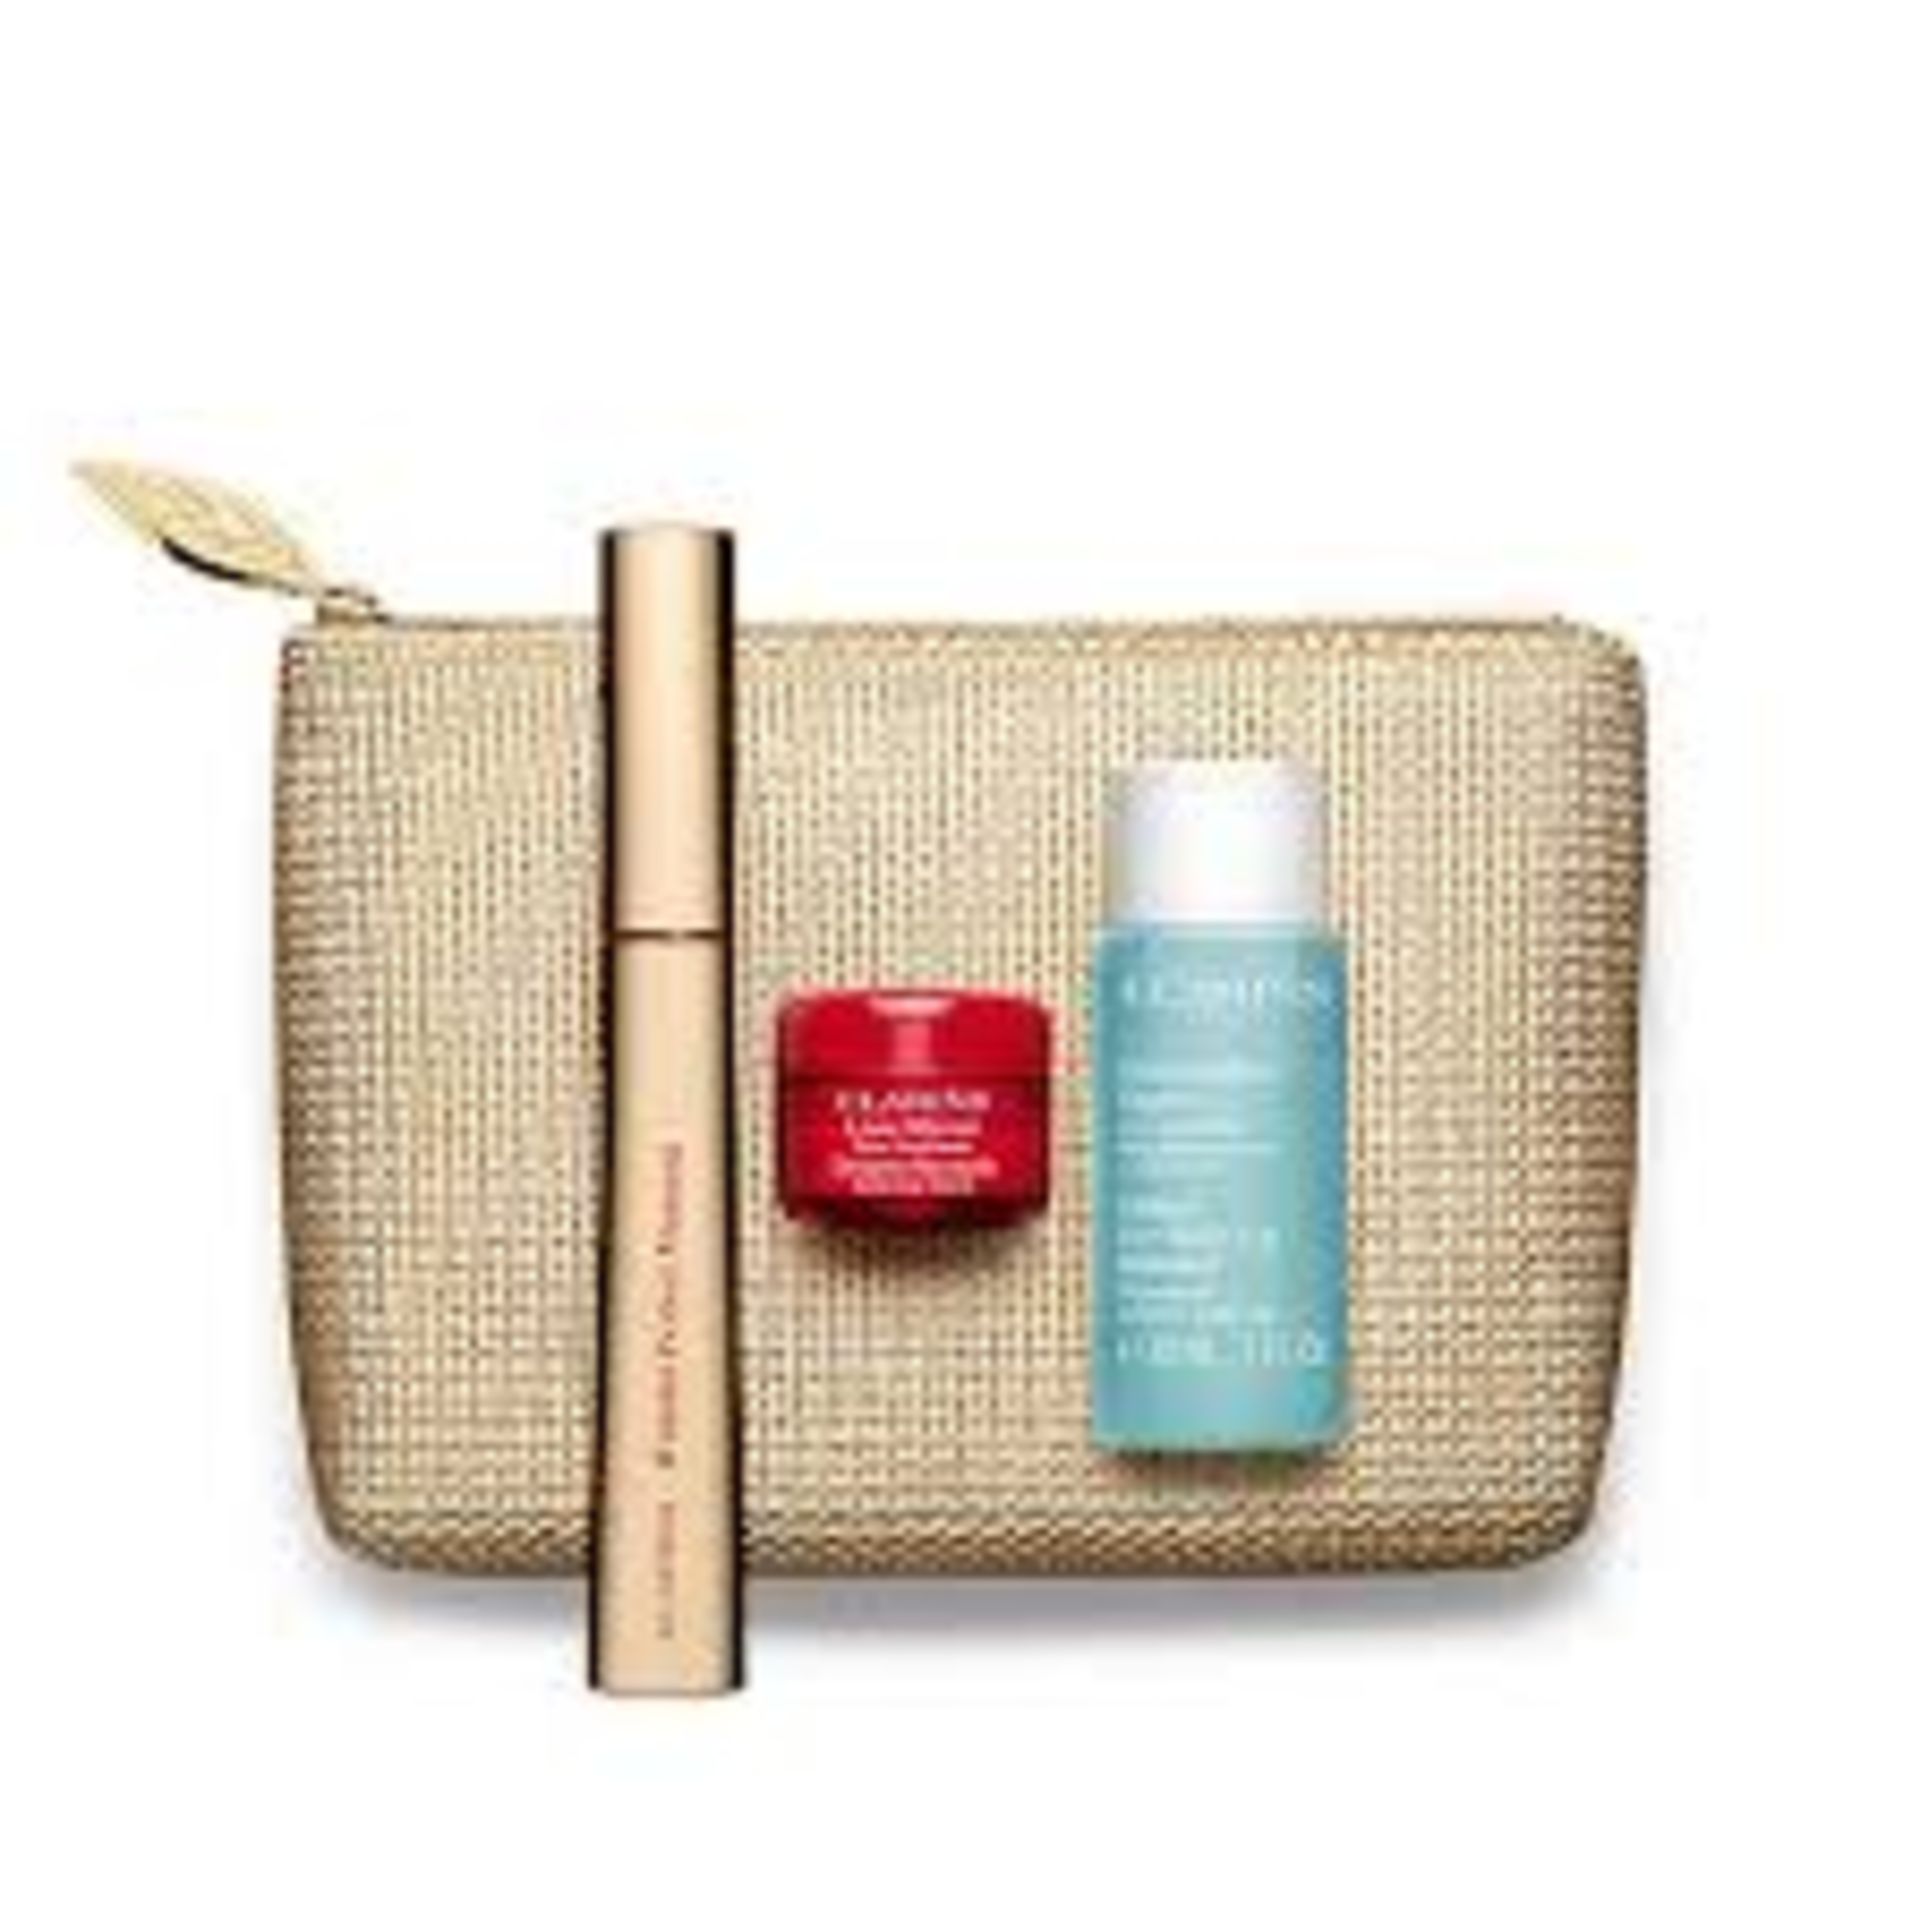 V Brand New Clarins Perfect Eyes Collection Gift Set, including Mascara, 'Instant Smooth